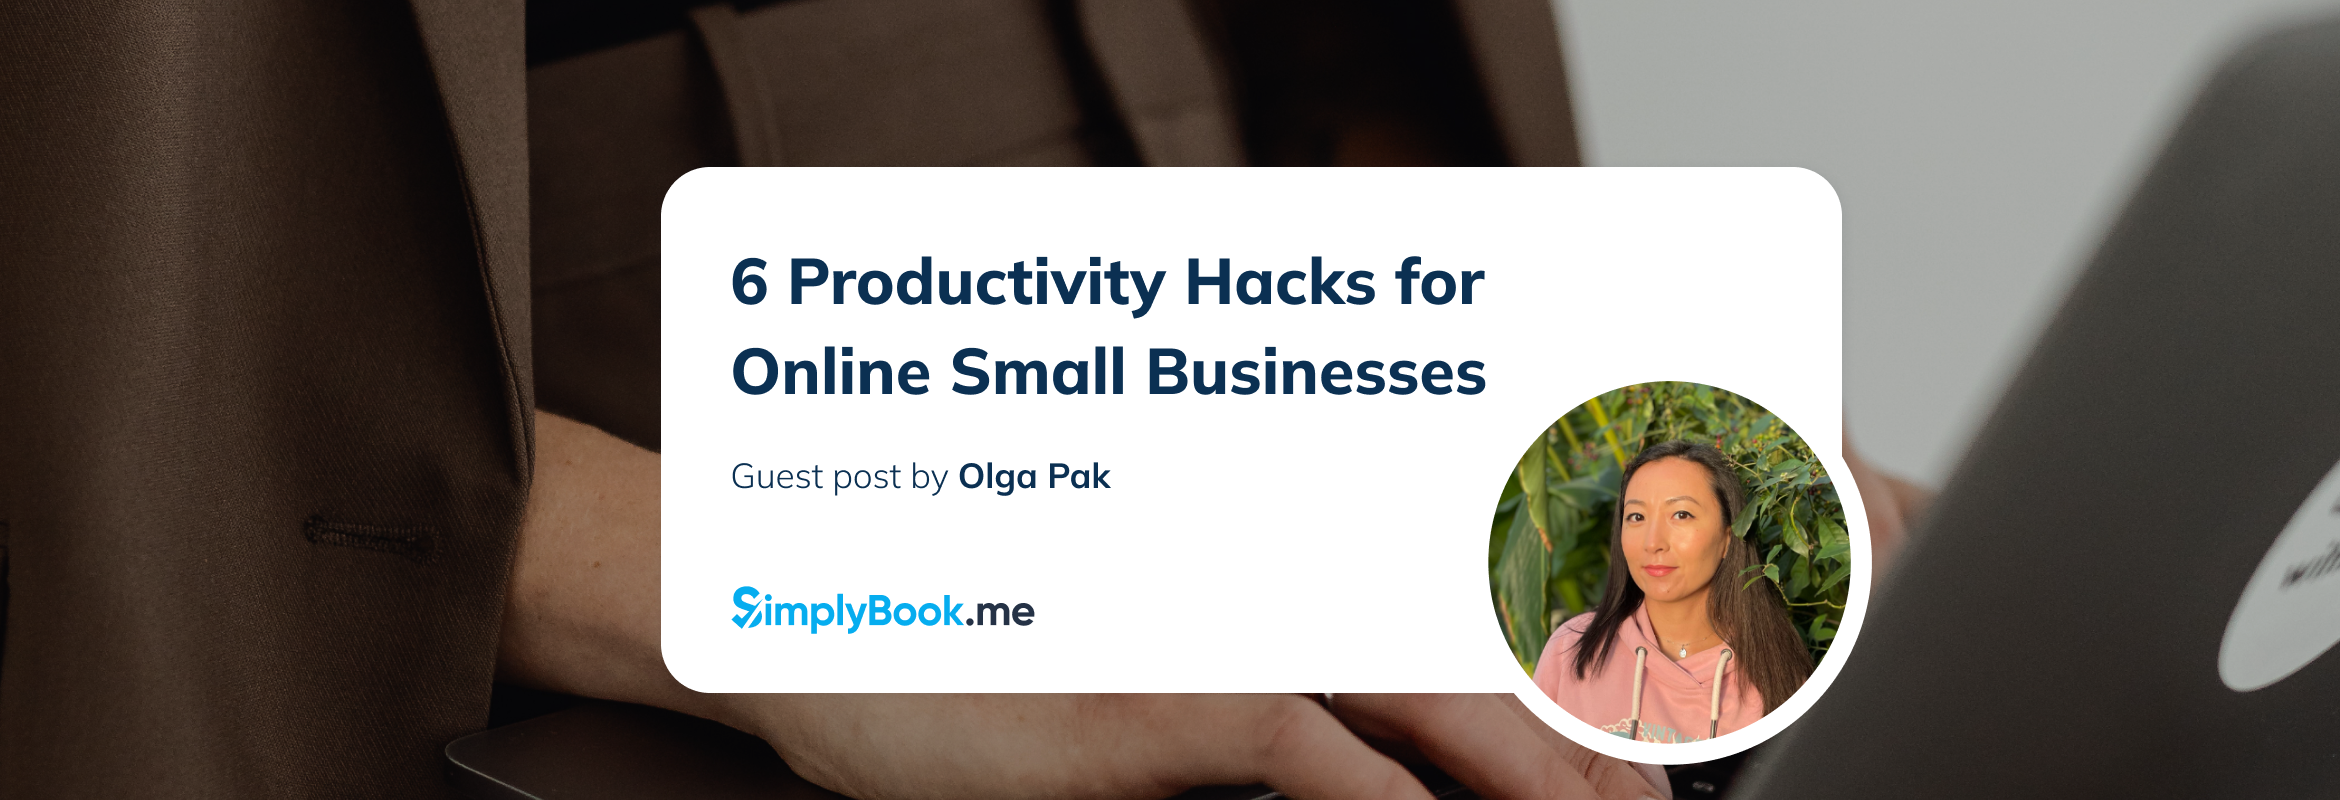 Productivity hacks for online small businesses